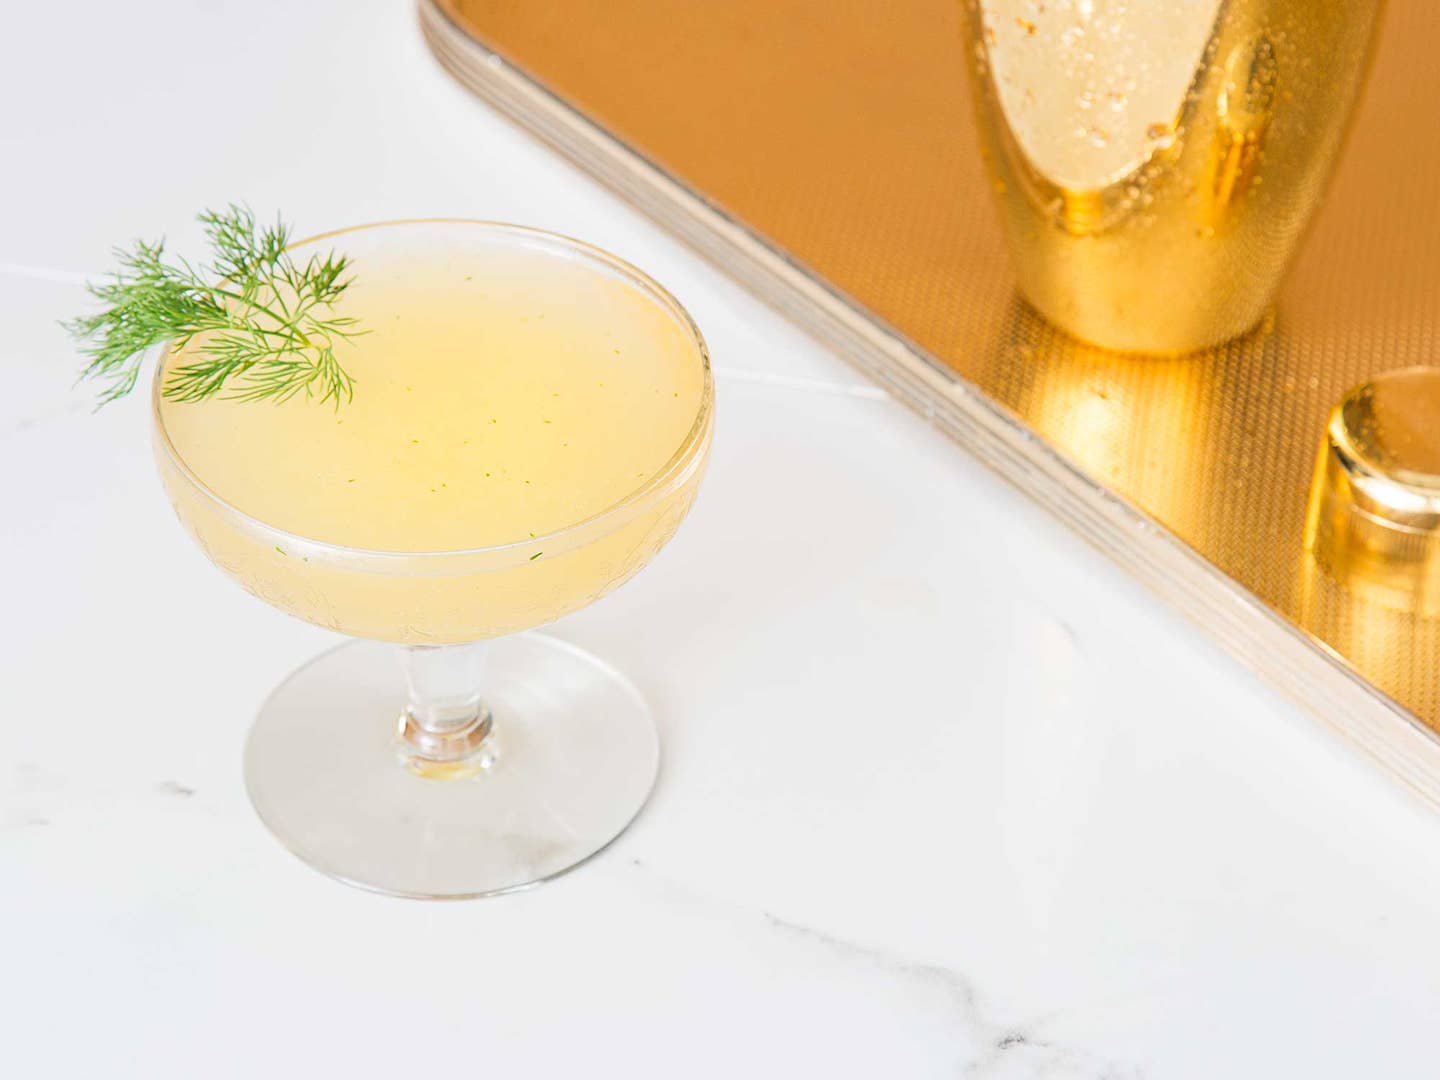 The Anvil Champagne Cocktail